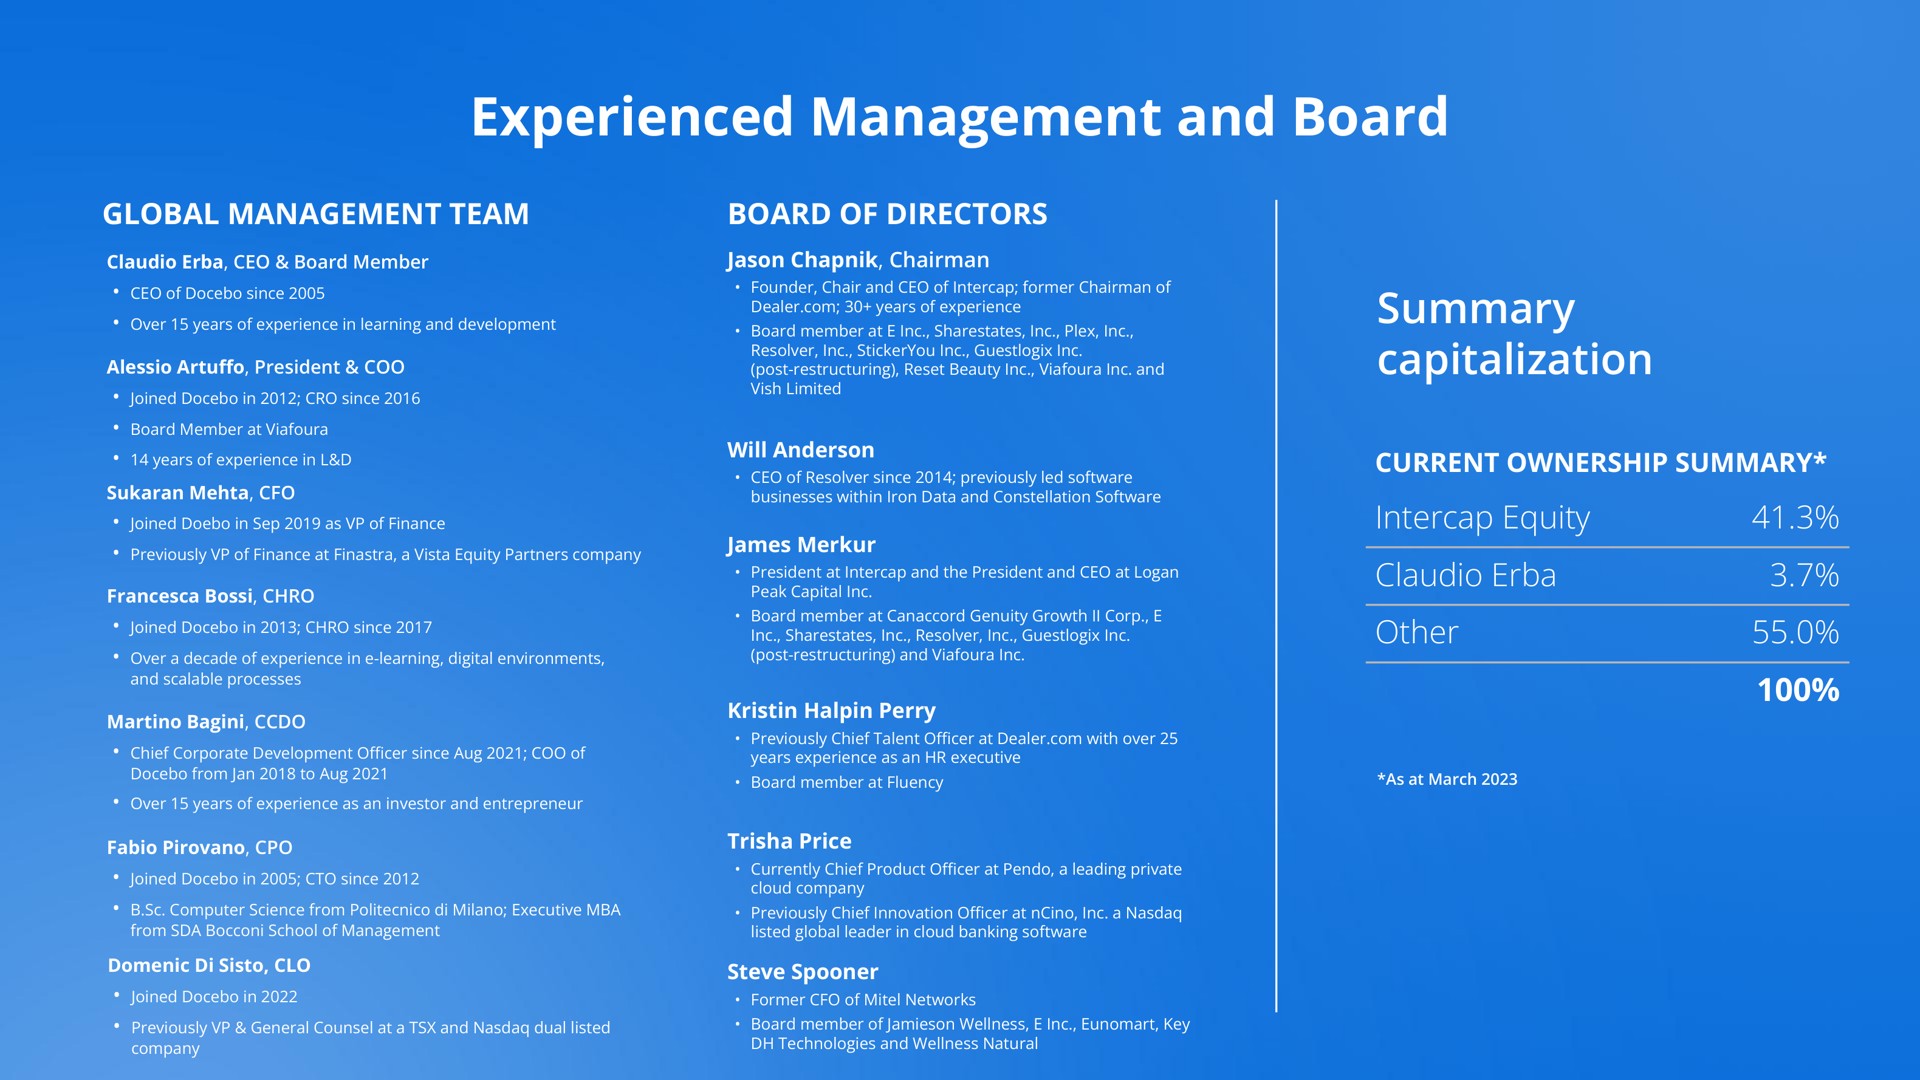 experienced management and board summary capitalization lea sere | Docebo